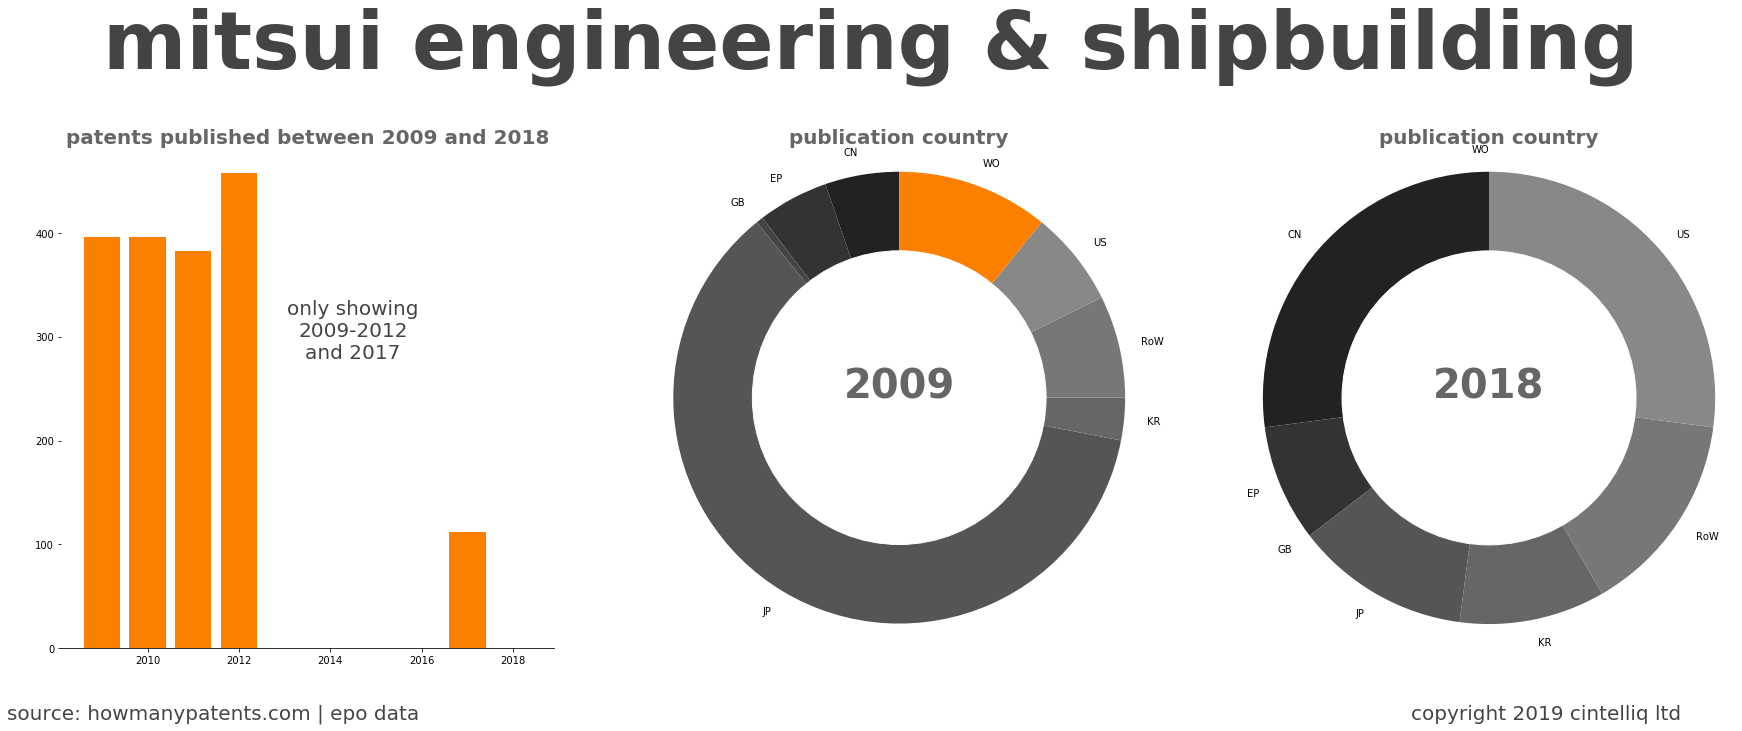 summary of patents for Mitsui Engineering & Shipbuilding